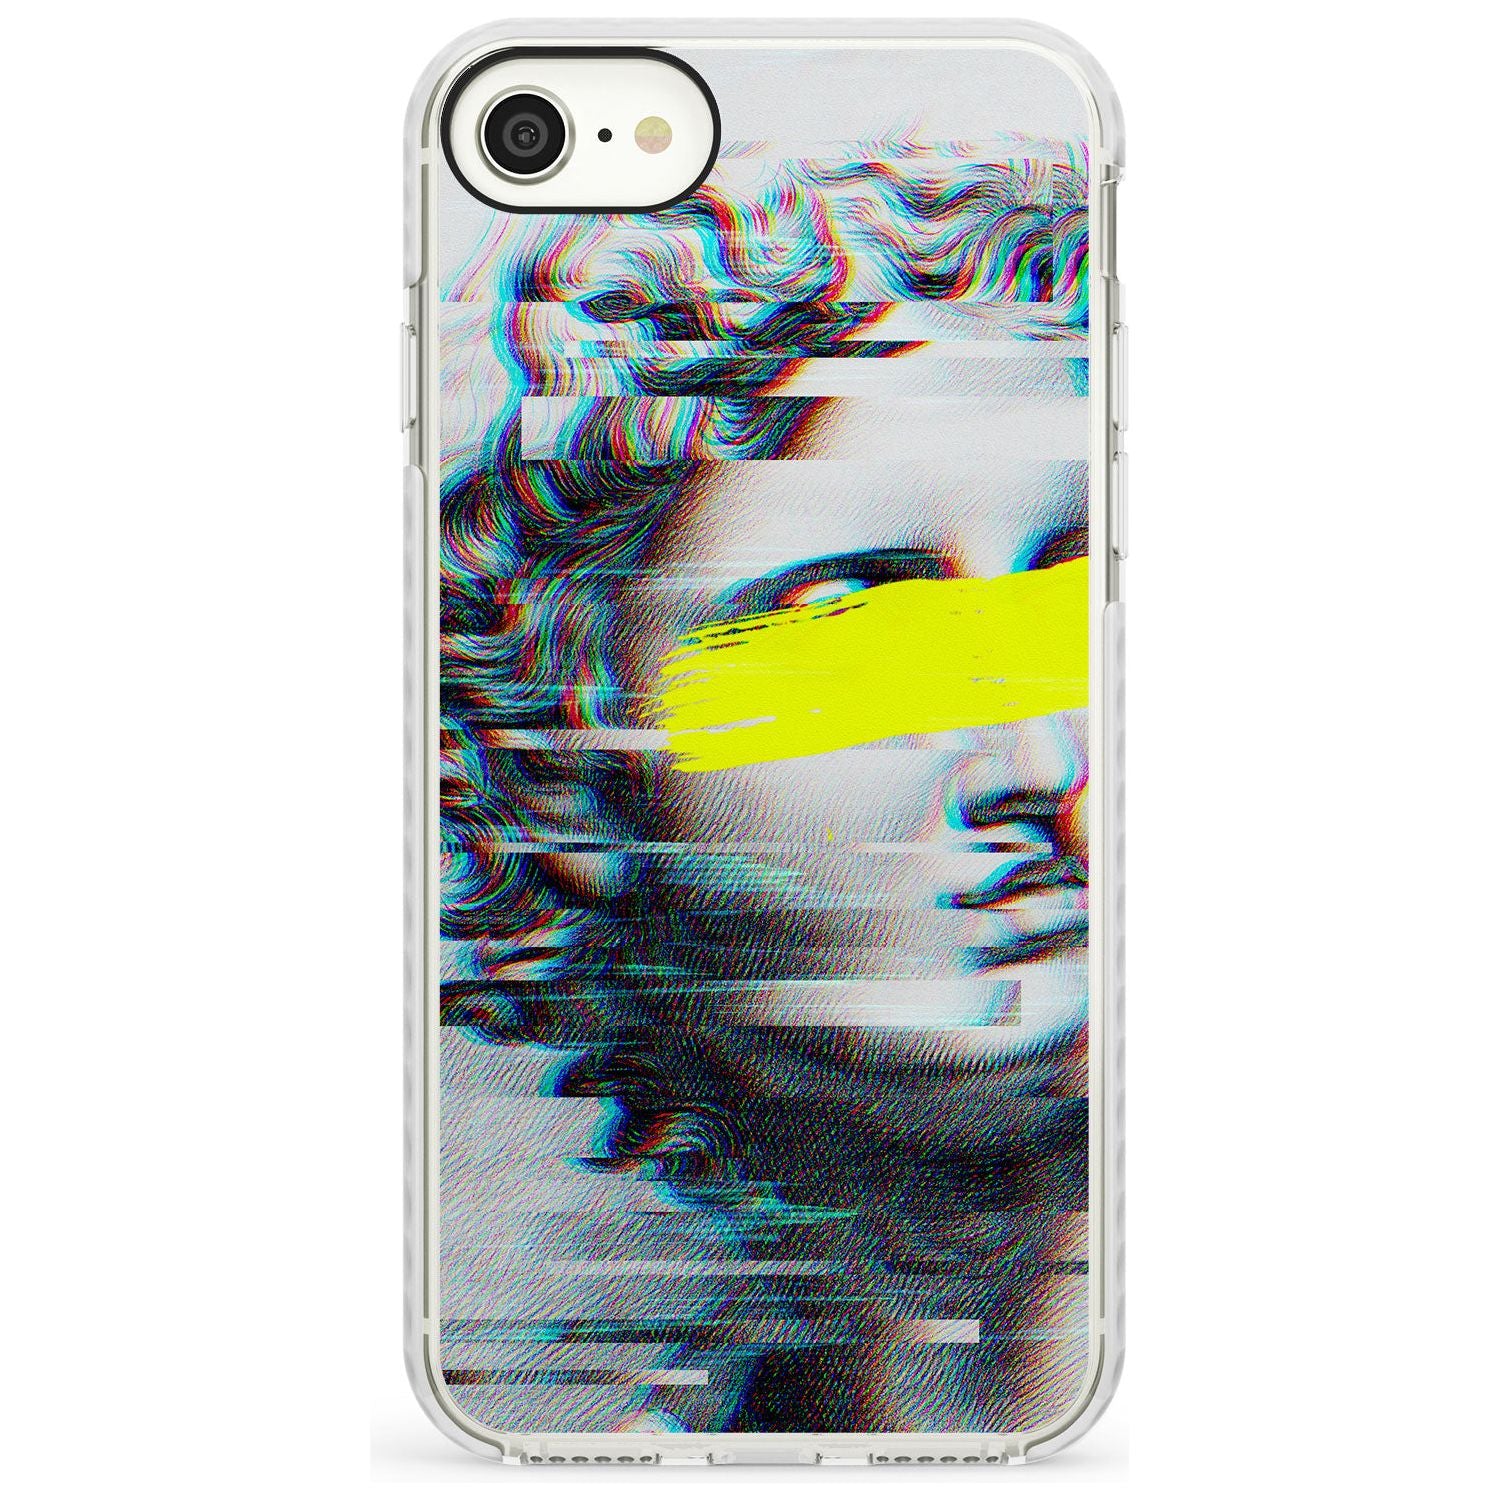 GLITCHED FRAGMENT Slim TPU Phone Case for iPhone SE 8 7 Plus